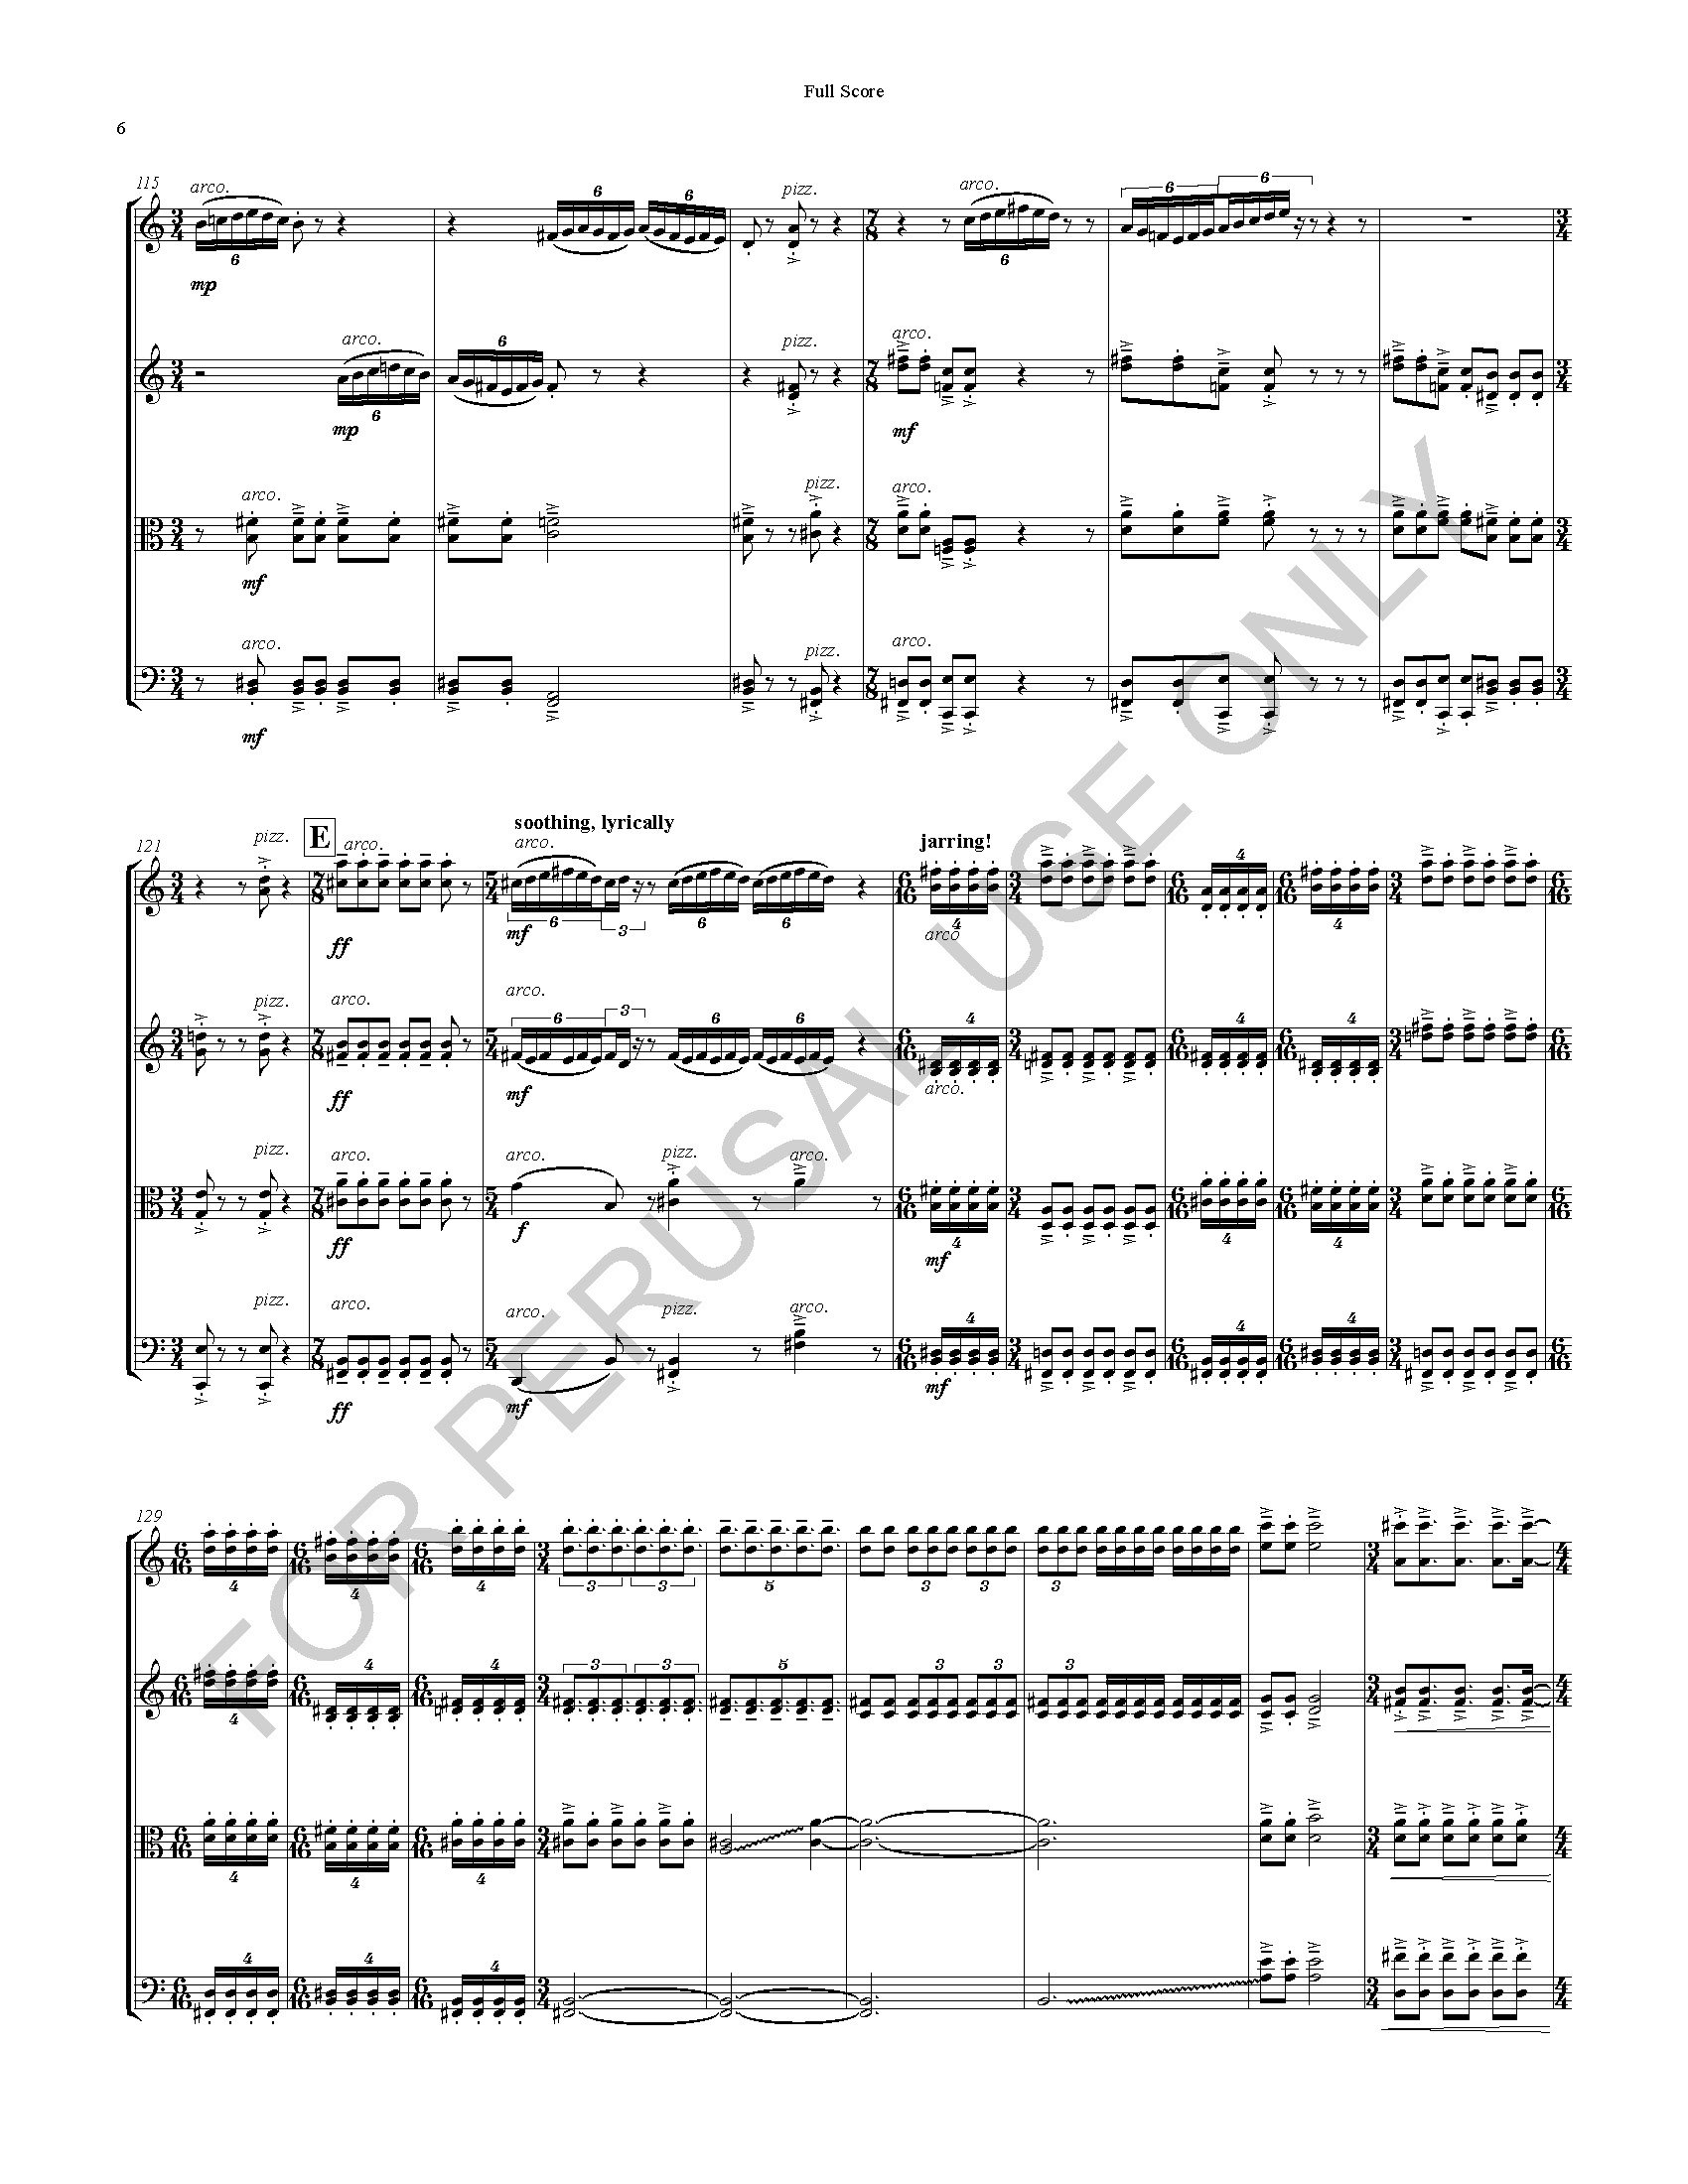 REFERENCE Smear Music (Full Score)_Page_06.jpg